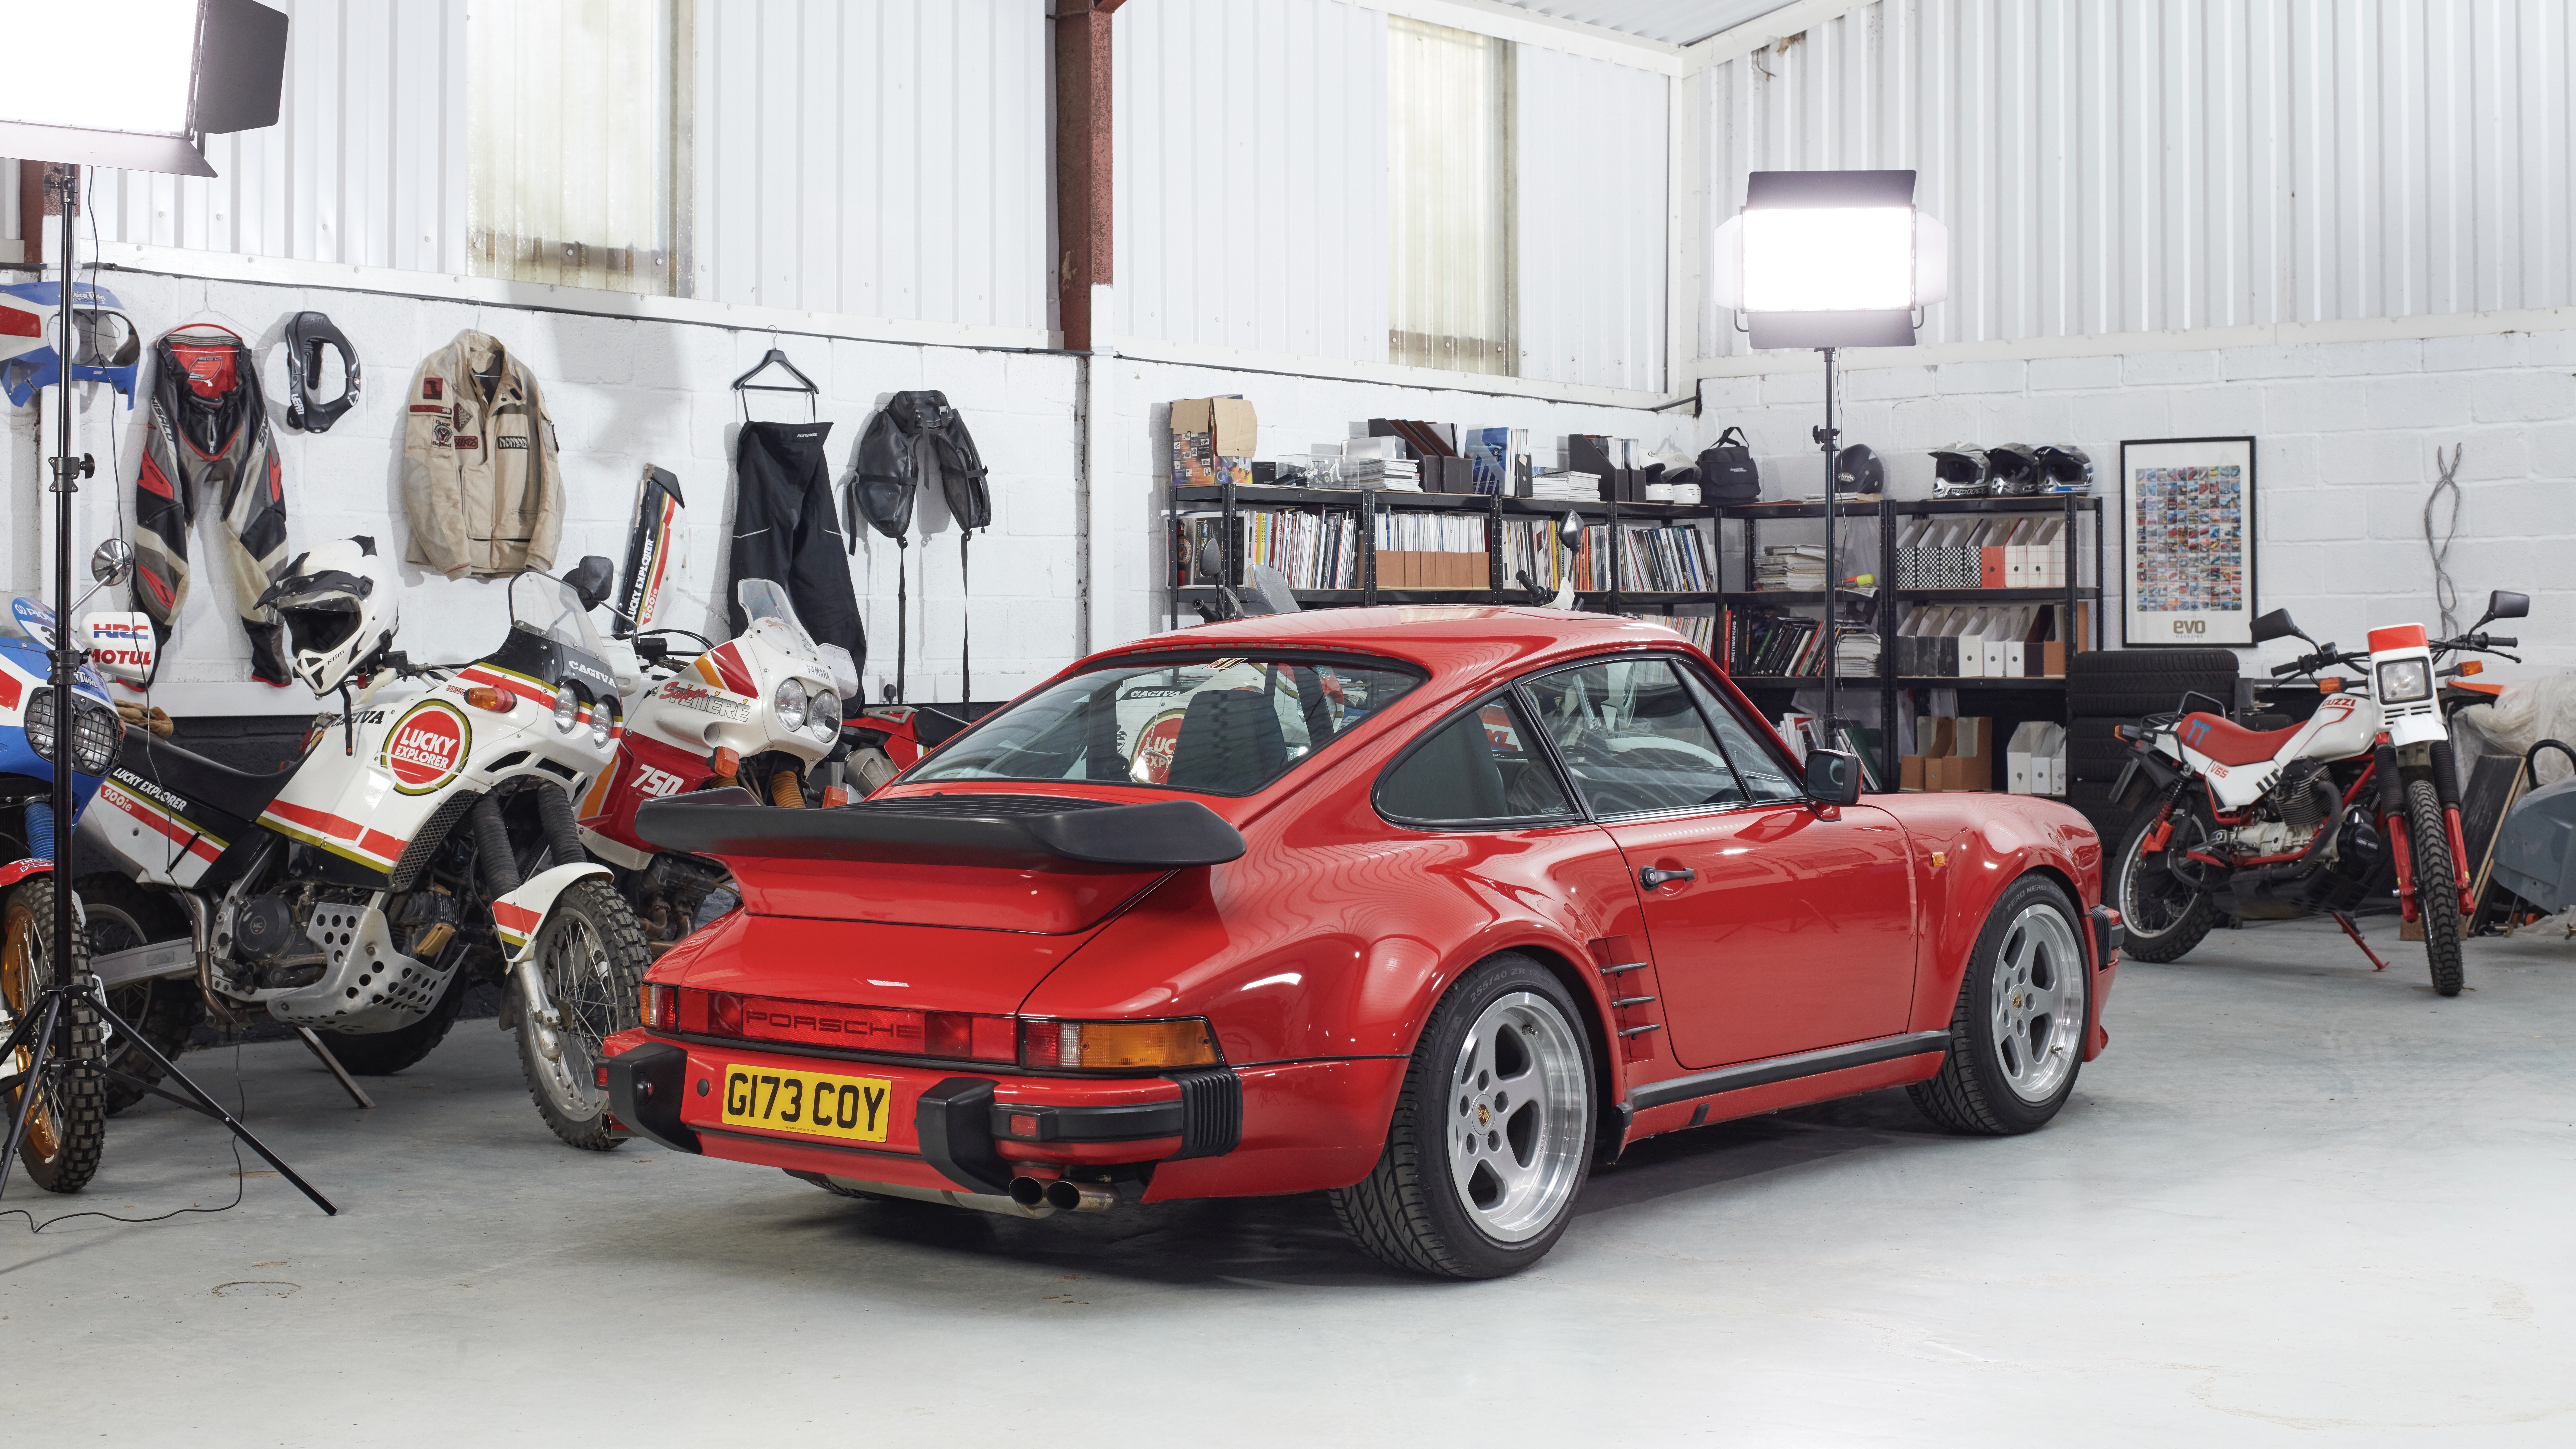 Porsche 930 Turbo S in Guards Red, surrounded by motorbikes